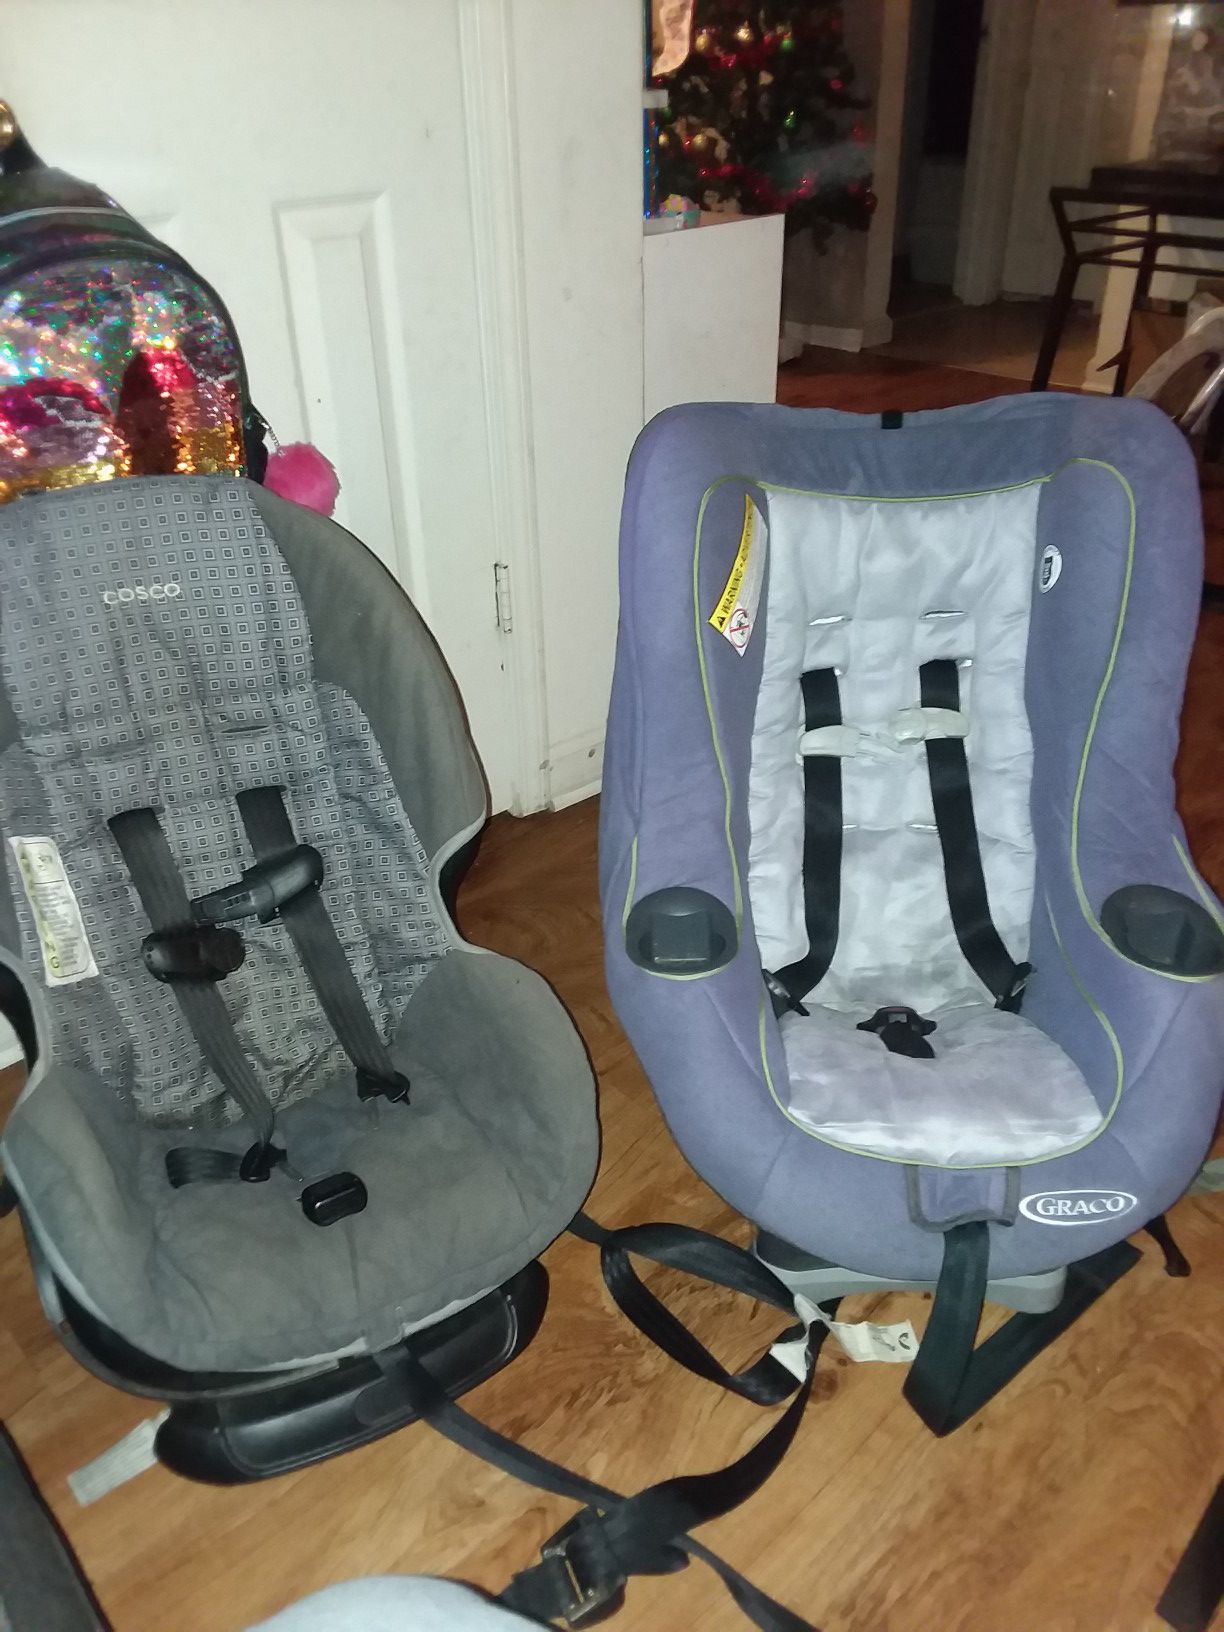 Car seats $45 for both